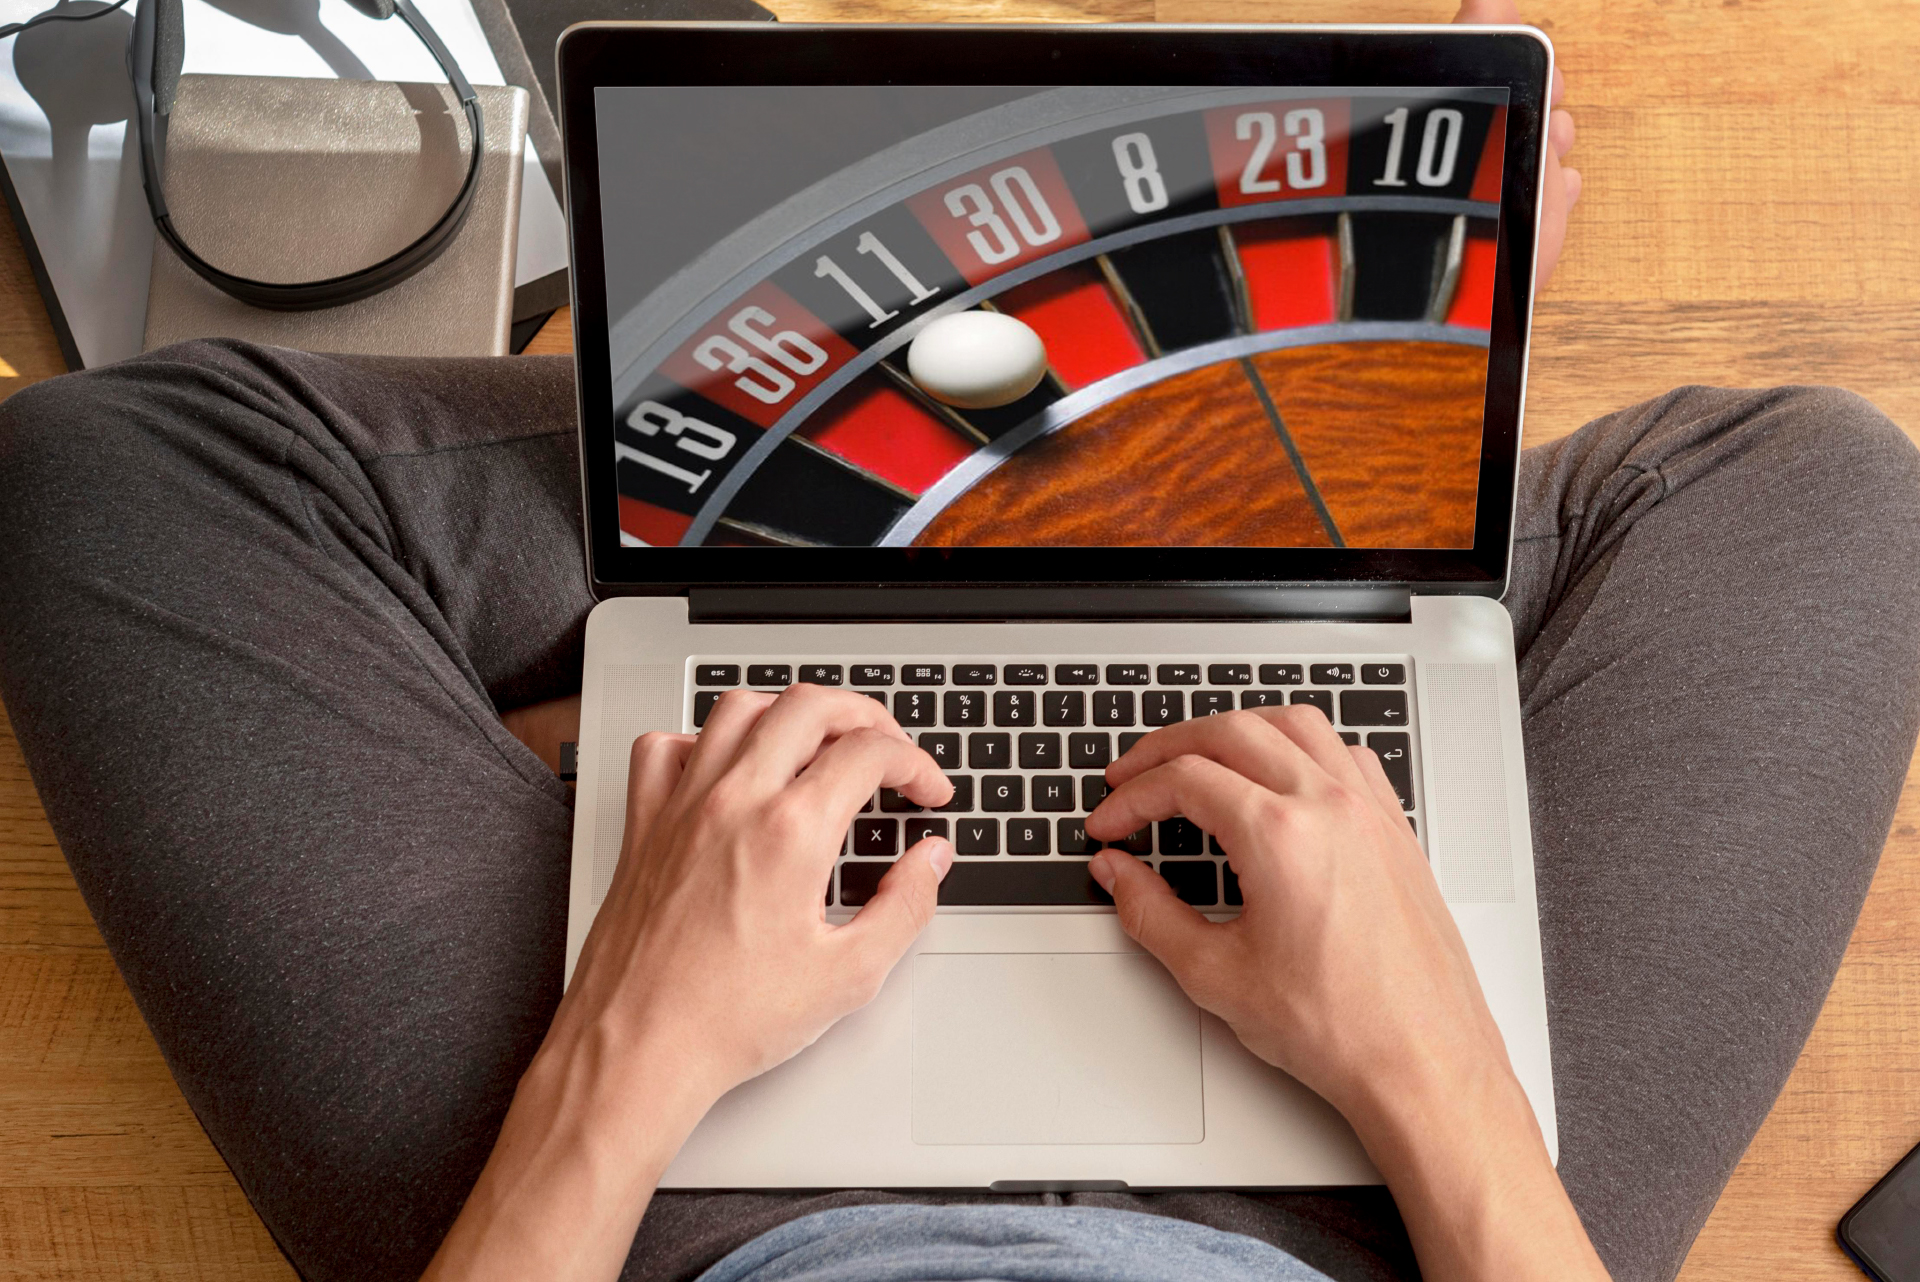 European and American Roulette are really popular among Jeetwin users.